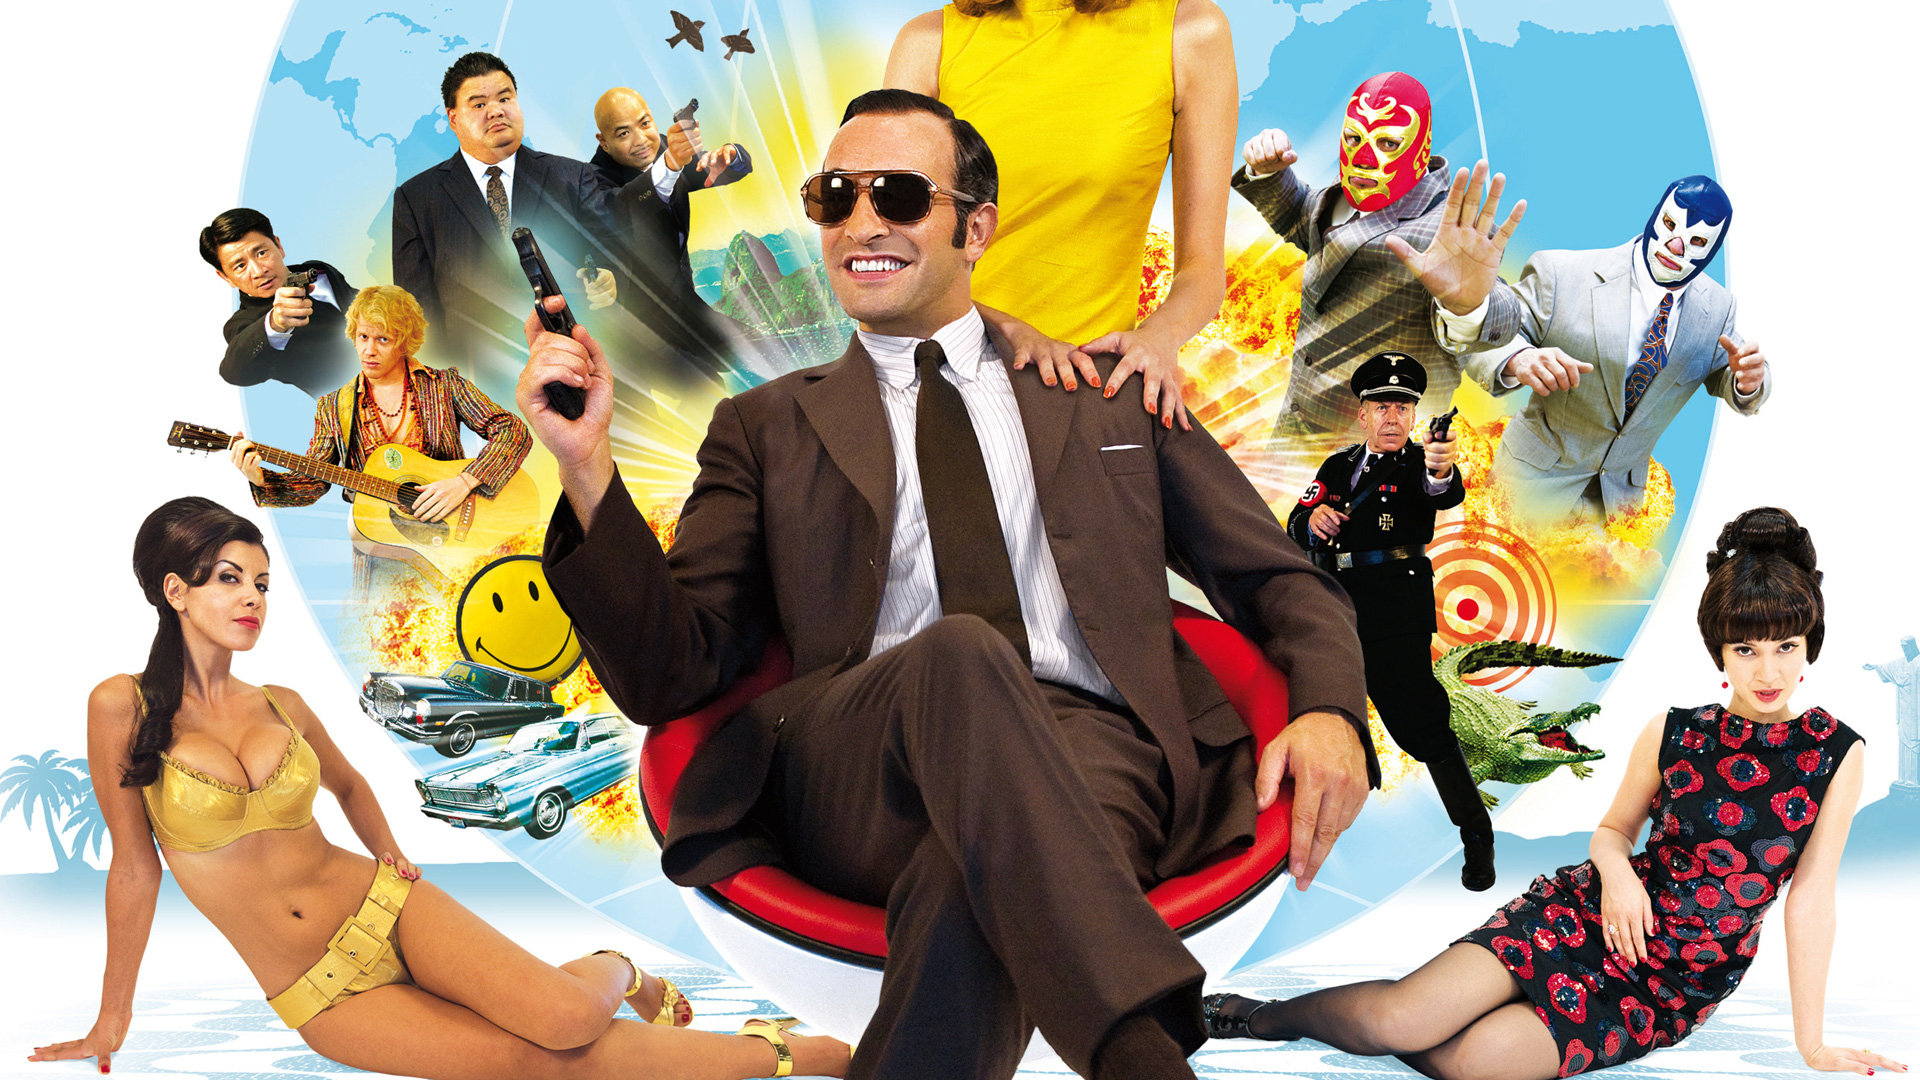 Movie OSS 117: Lost in Rio HD Wallpaper | Background Image